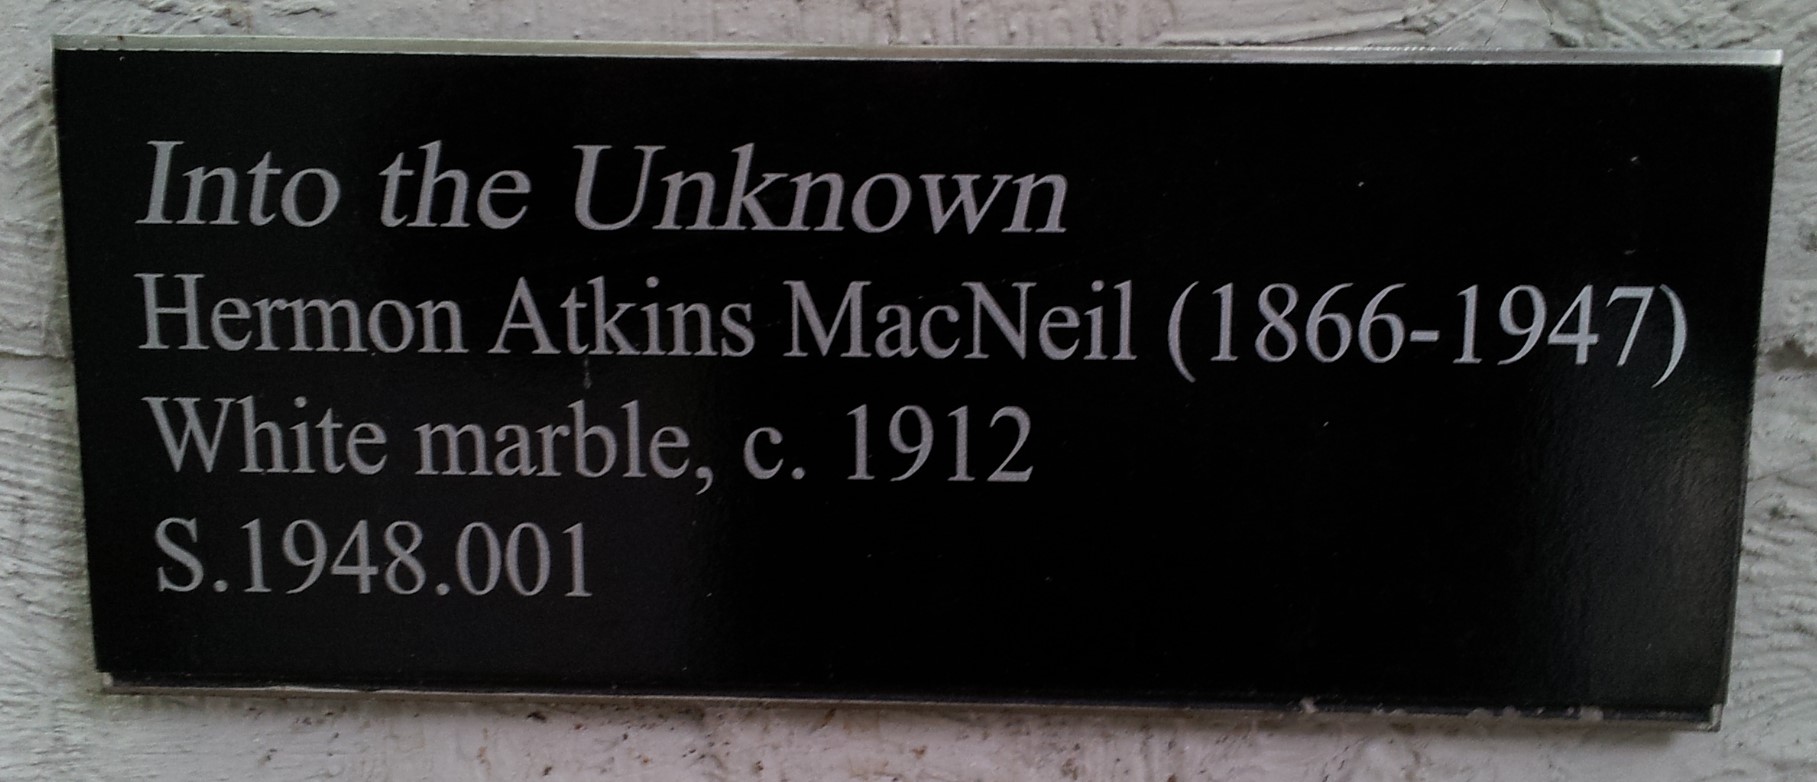 Into the Unknown by Herman Atkins MacNeil (plaque)